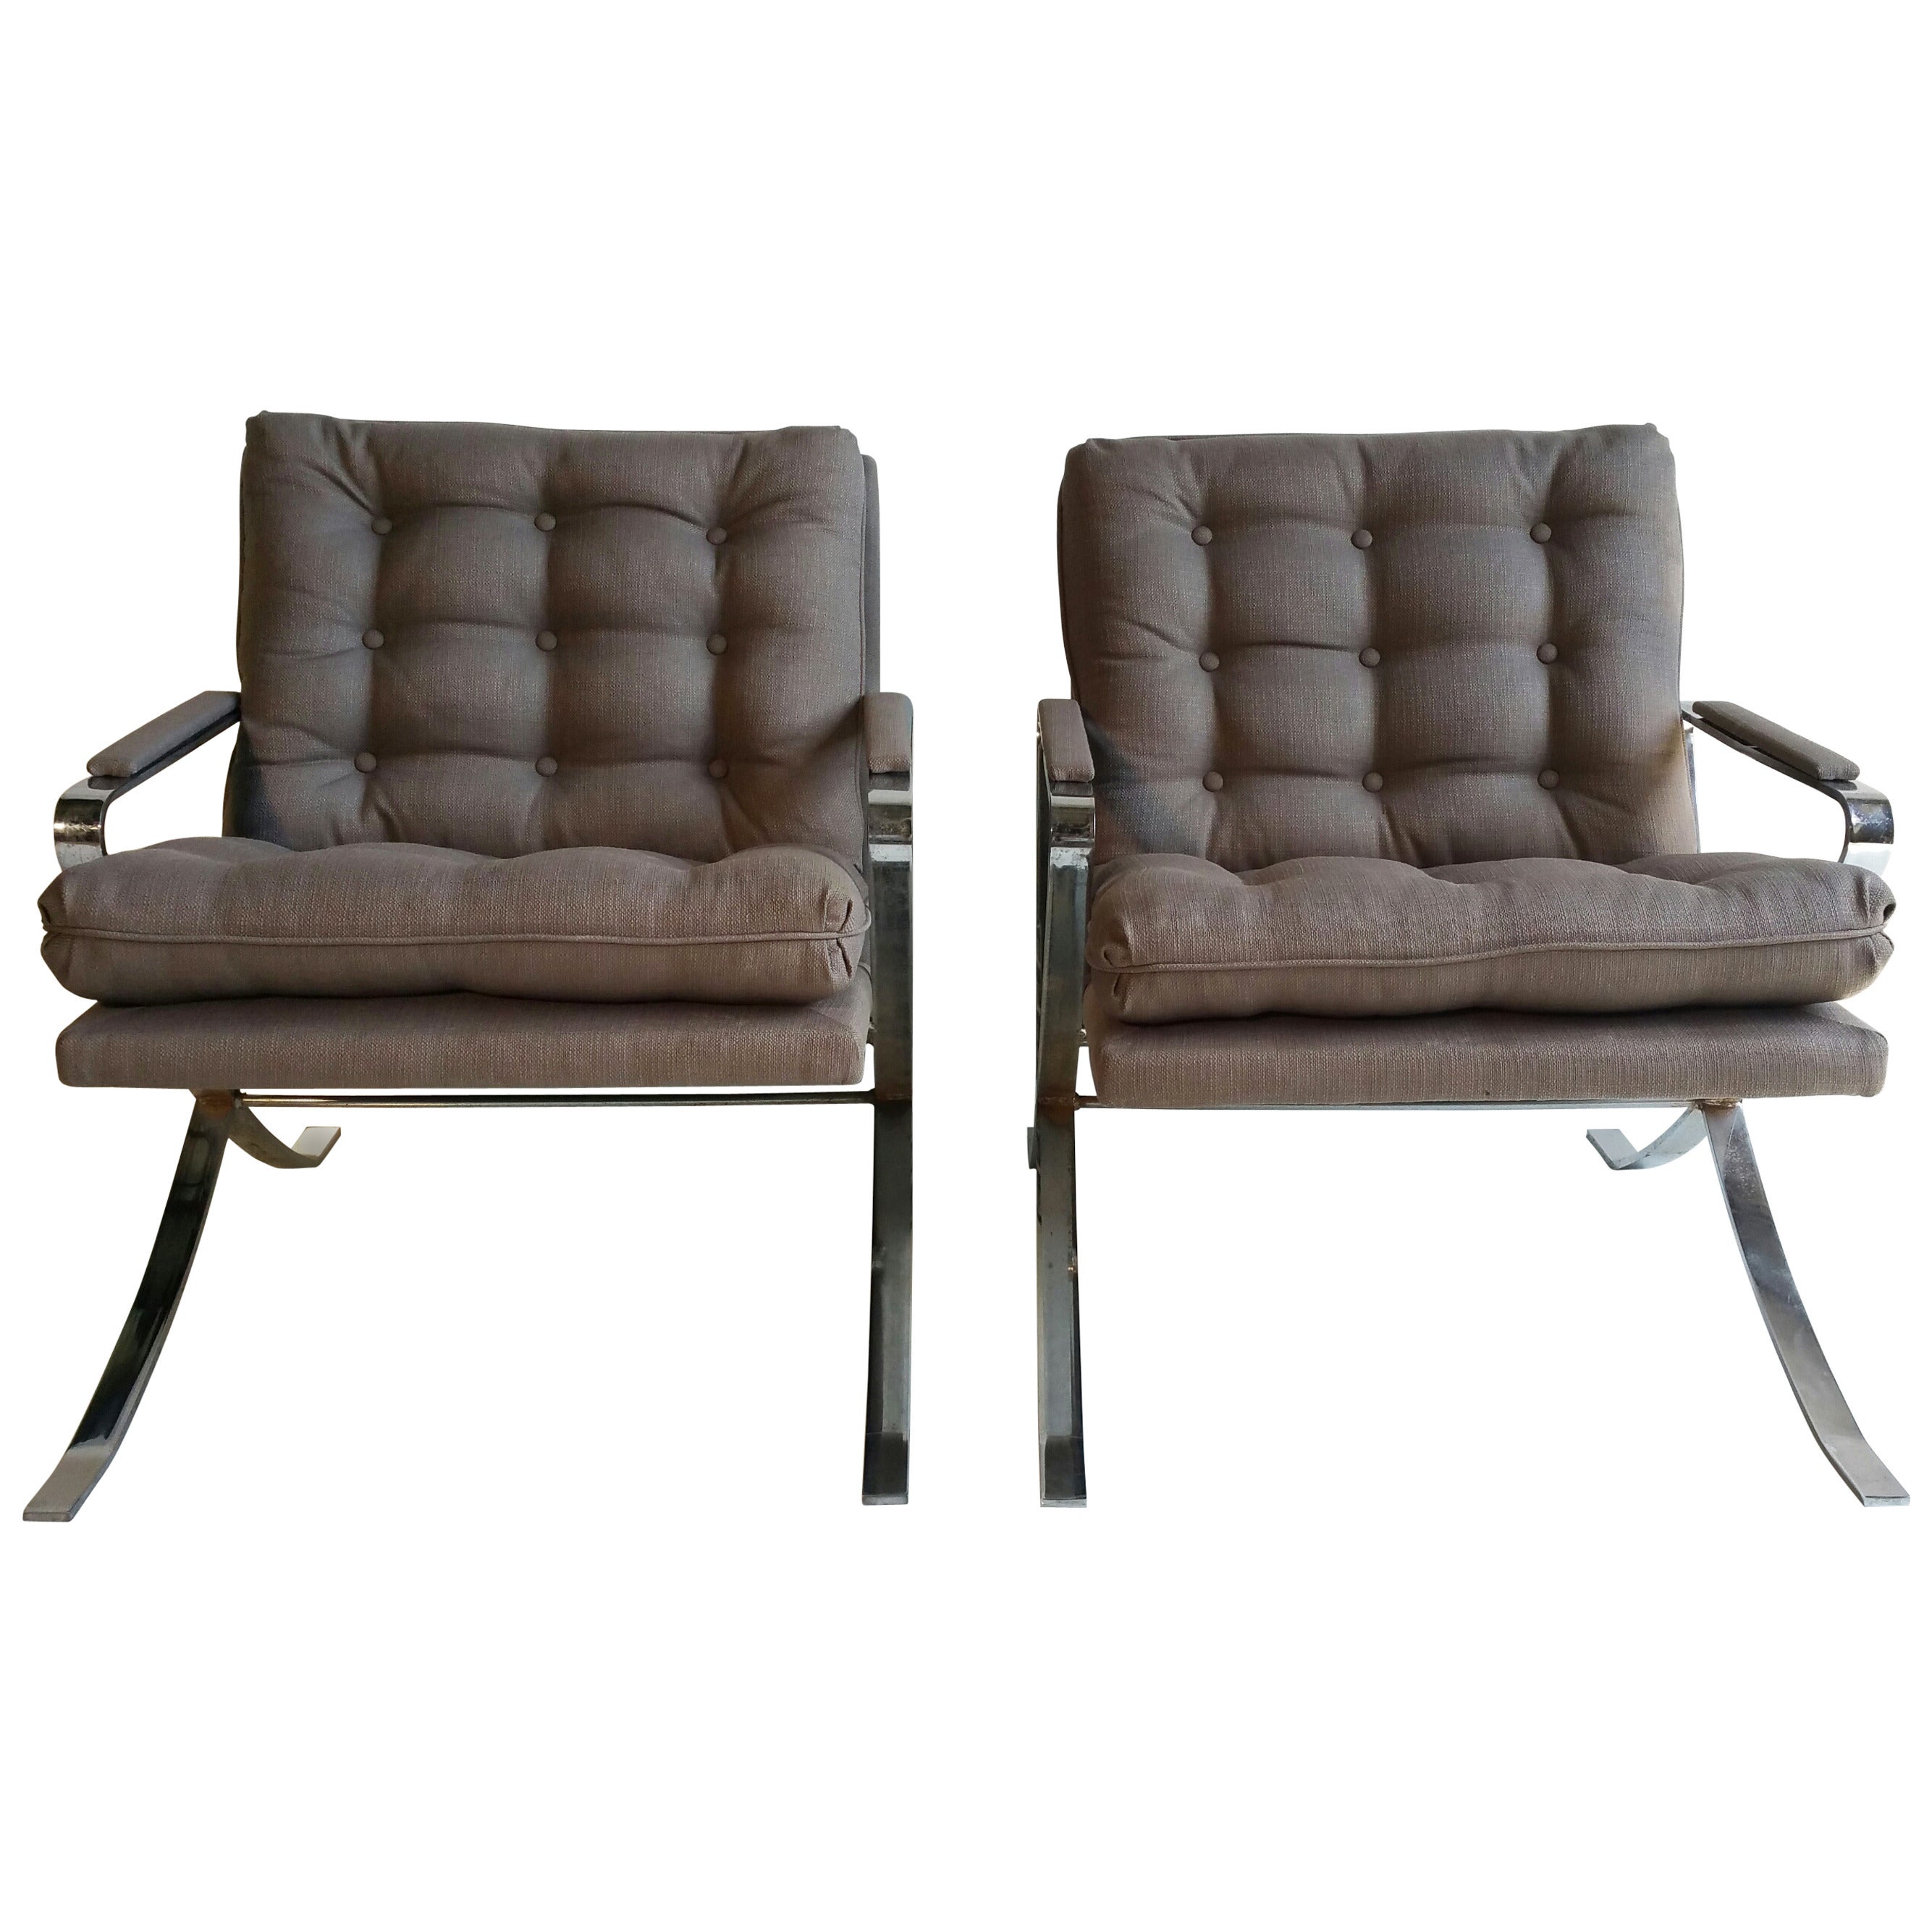 Pair of 1970s Flat Steel Chrome Lounge Chairs, Milo Baughman Inspired For Sale